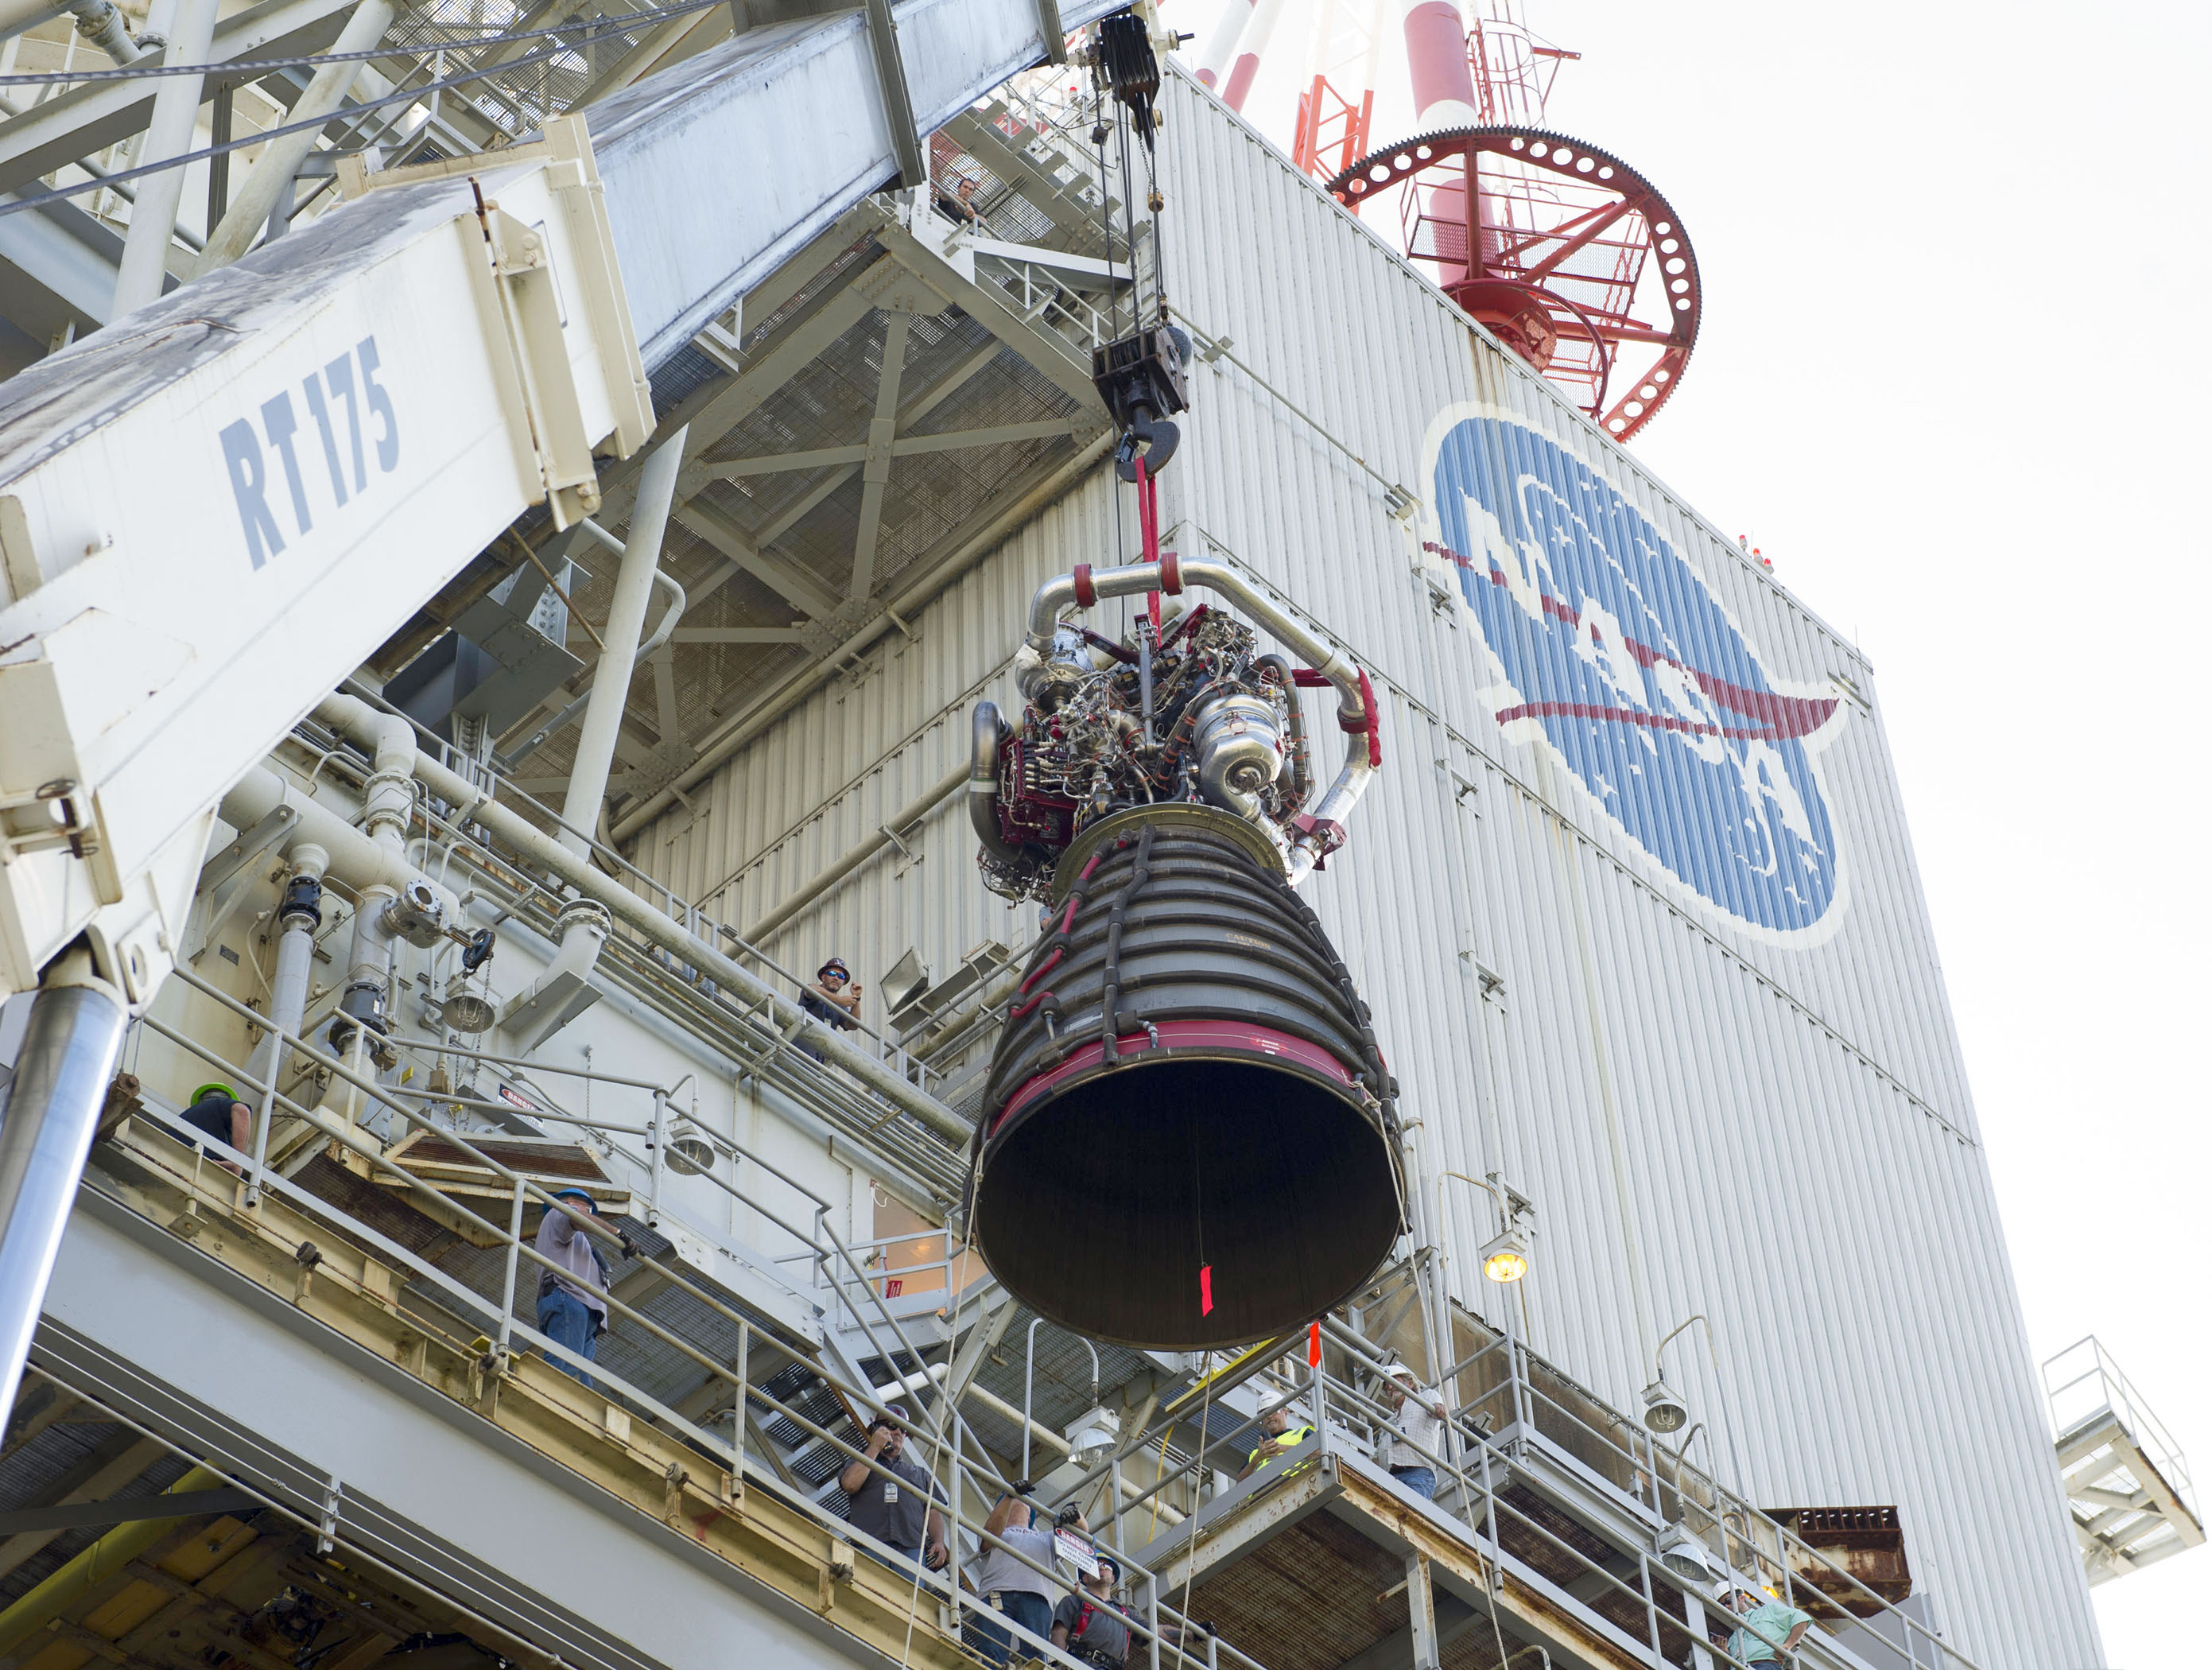 Aerojet Rocketdyne Races to the Moon with High-Performance RS-25 Engines